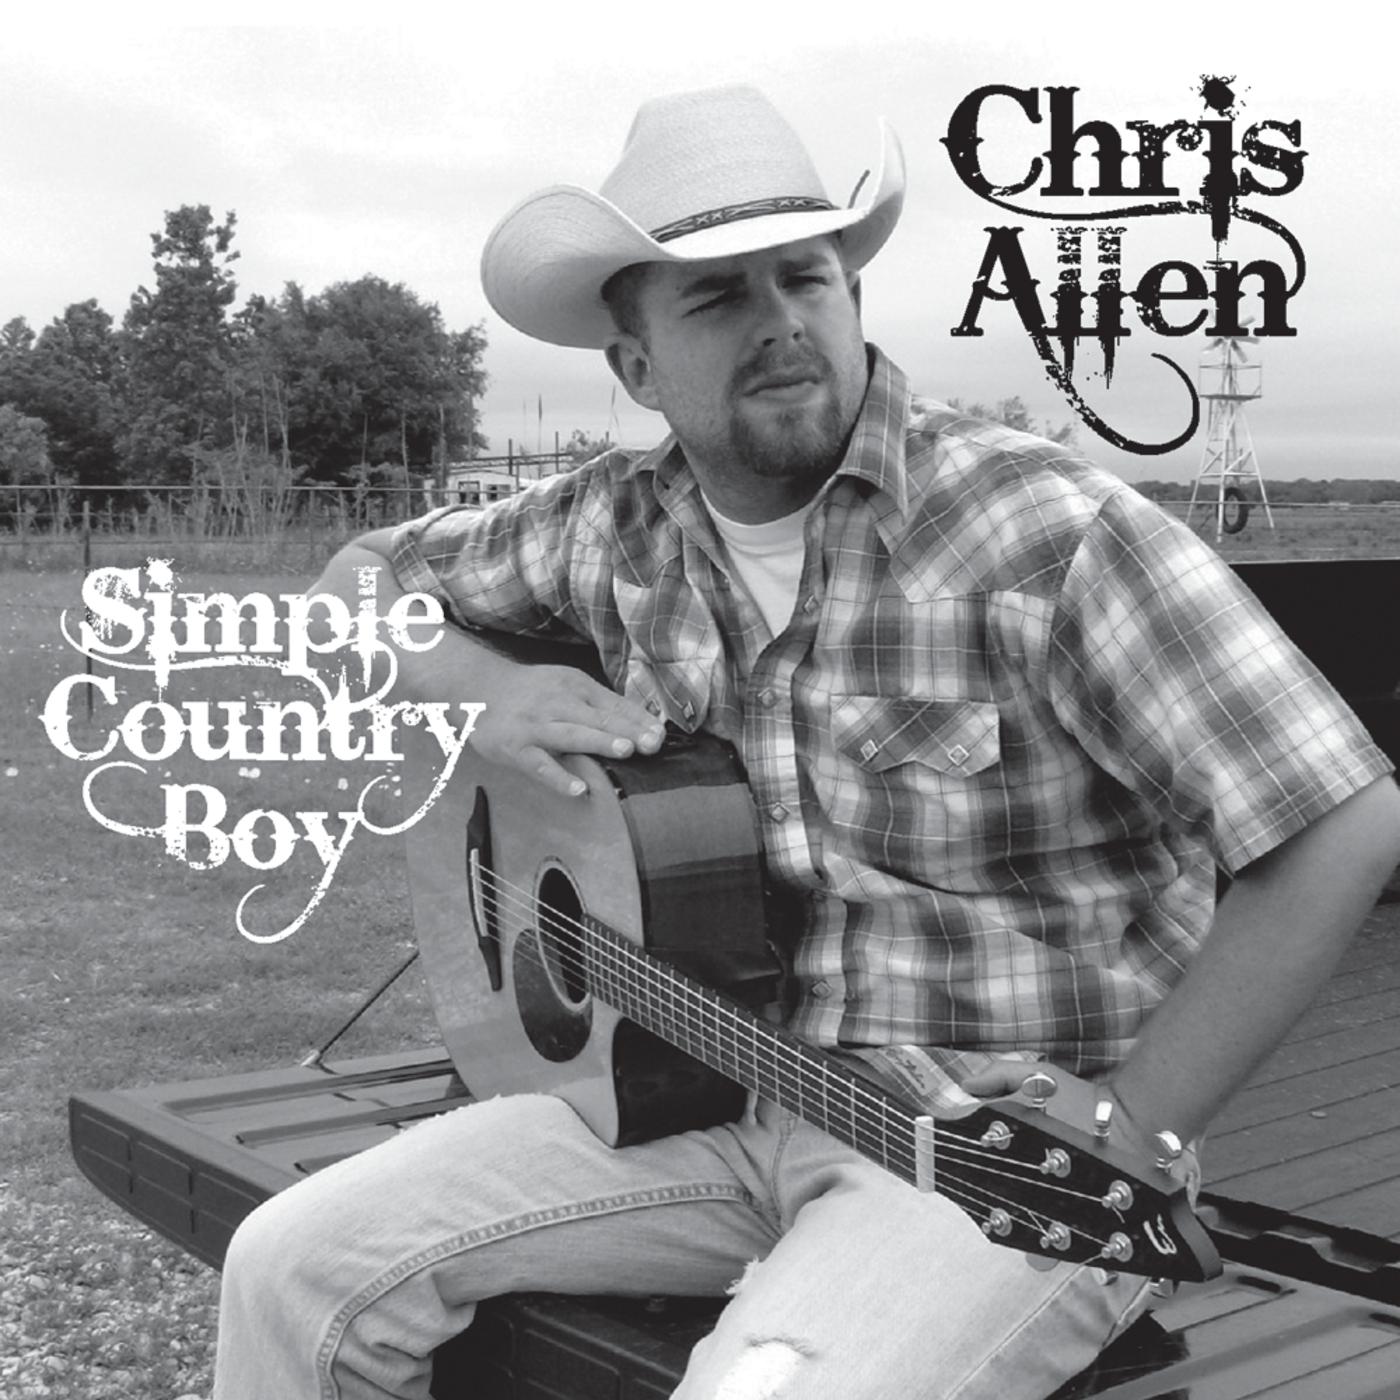 Chris Allen - Other Side of Texas